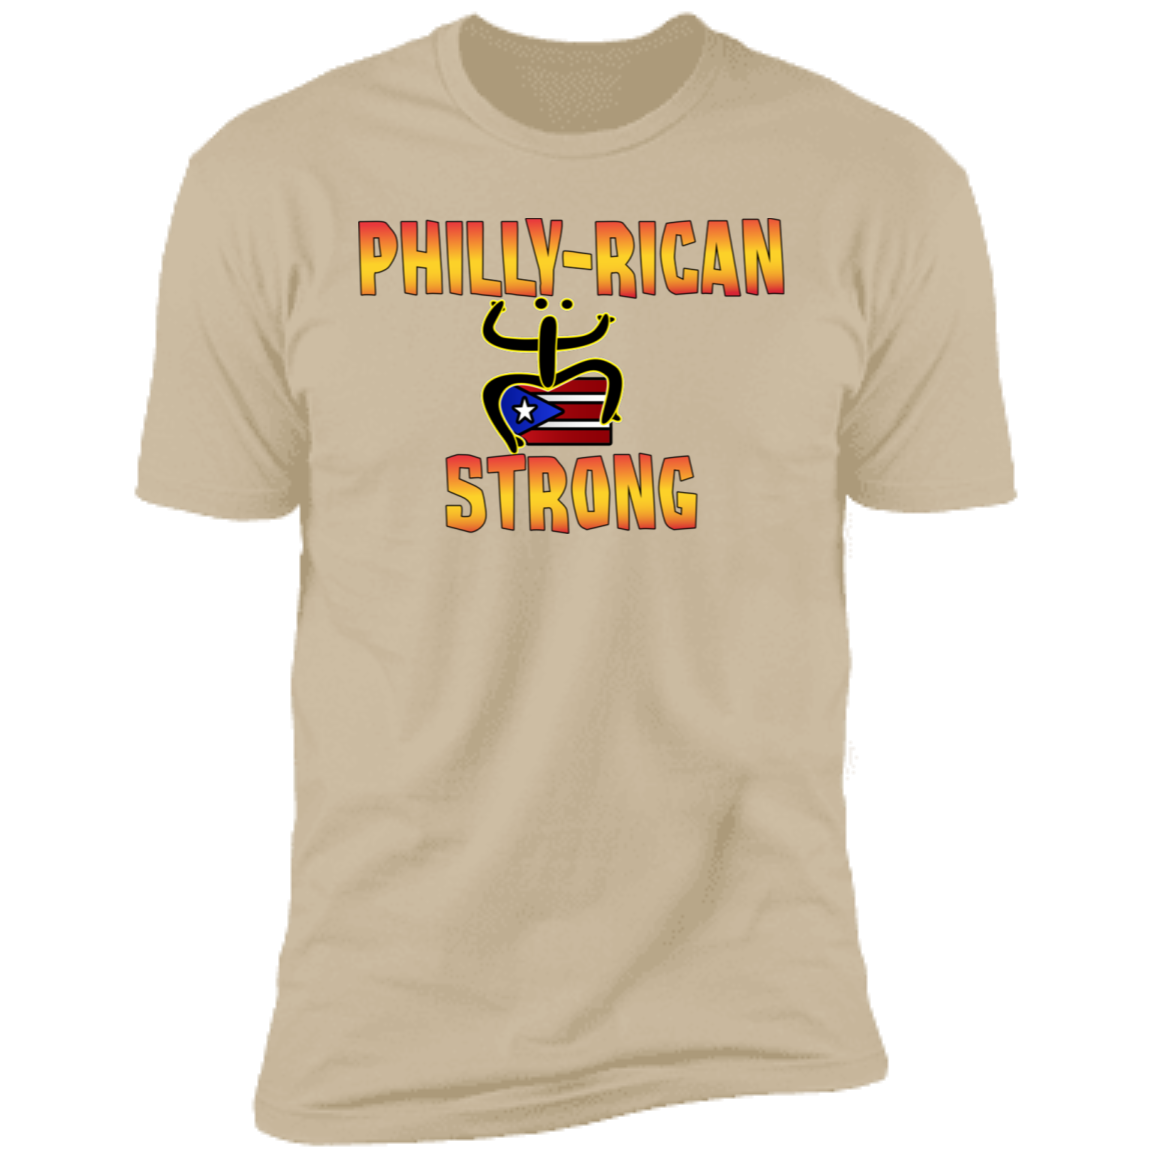 Philly-Rican Strong Premium Short Sleeve T-Shirt - Puerto Rican Pride